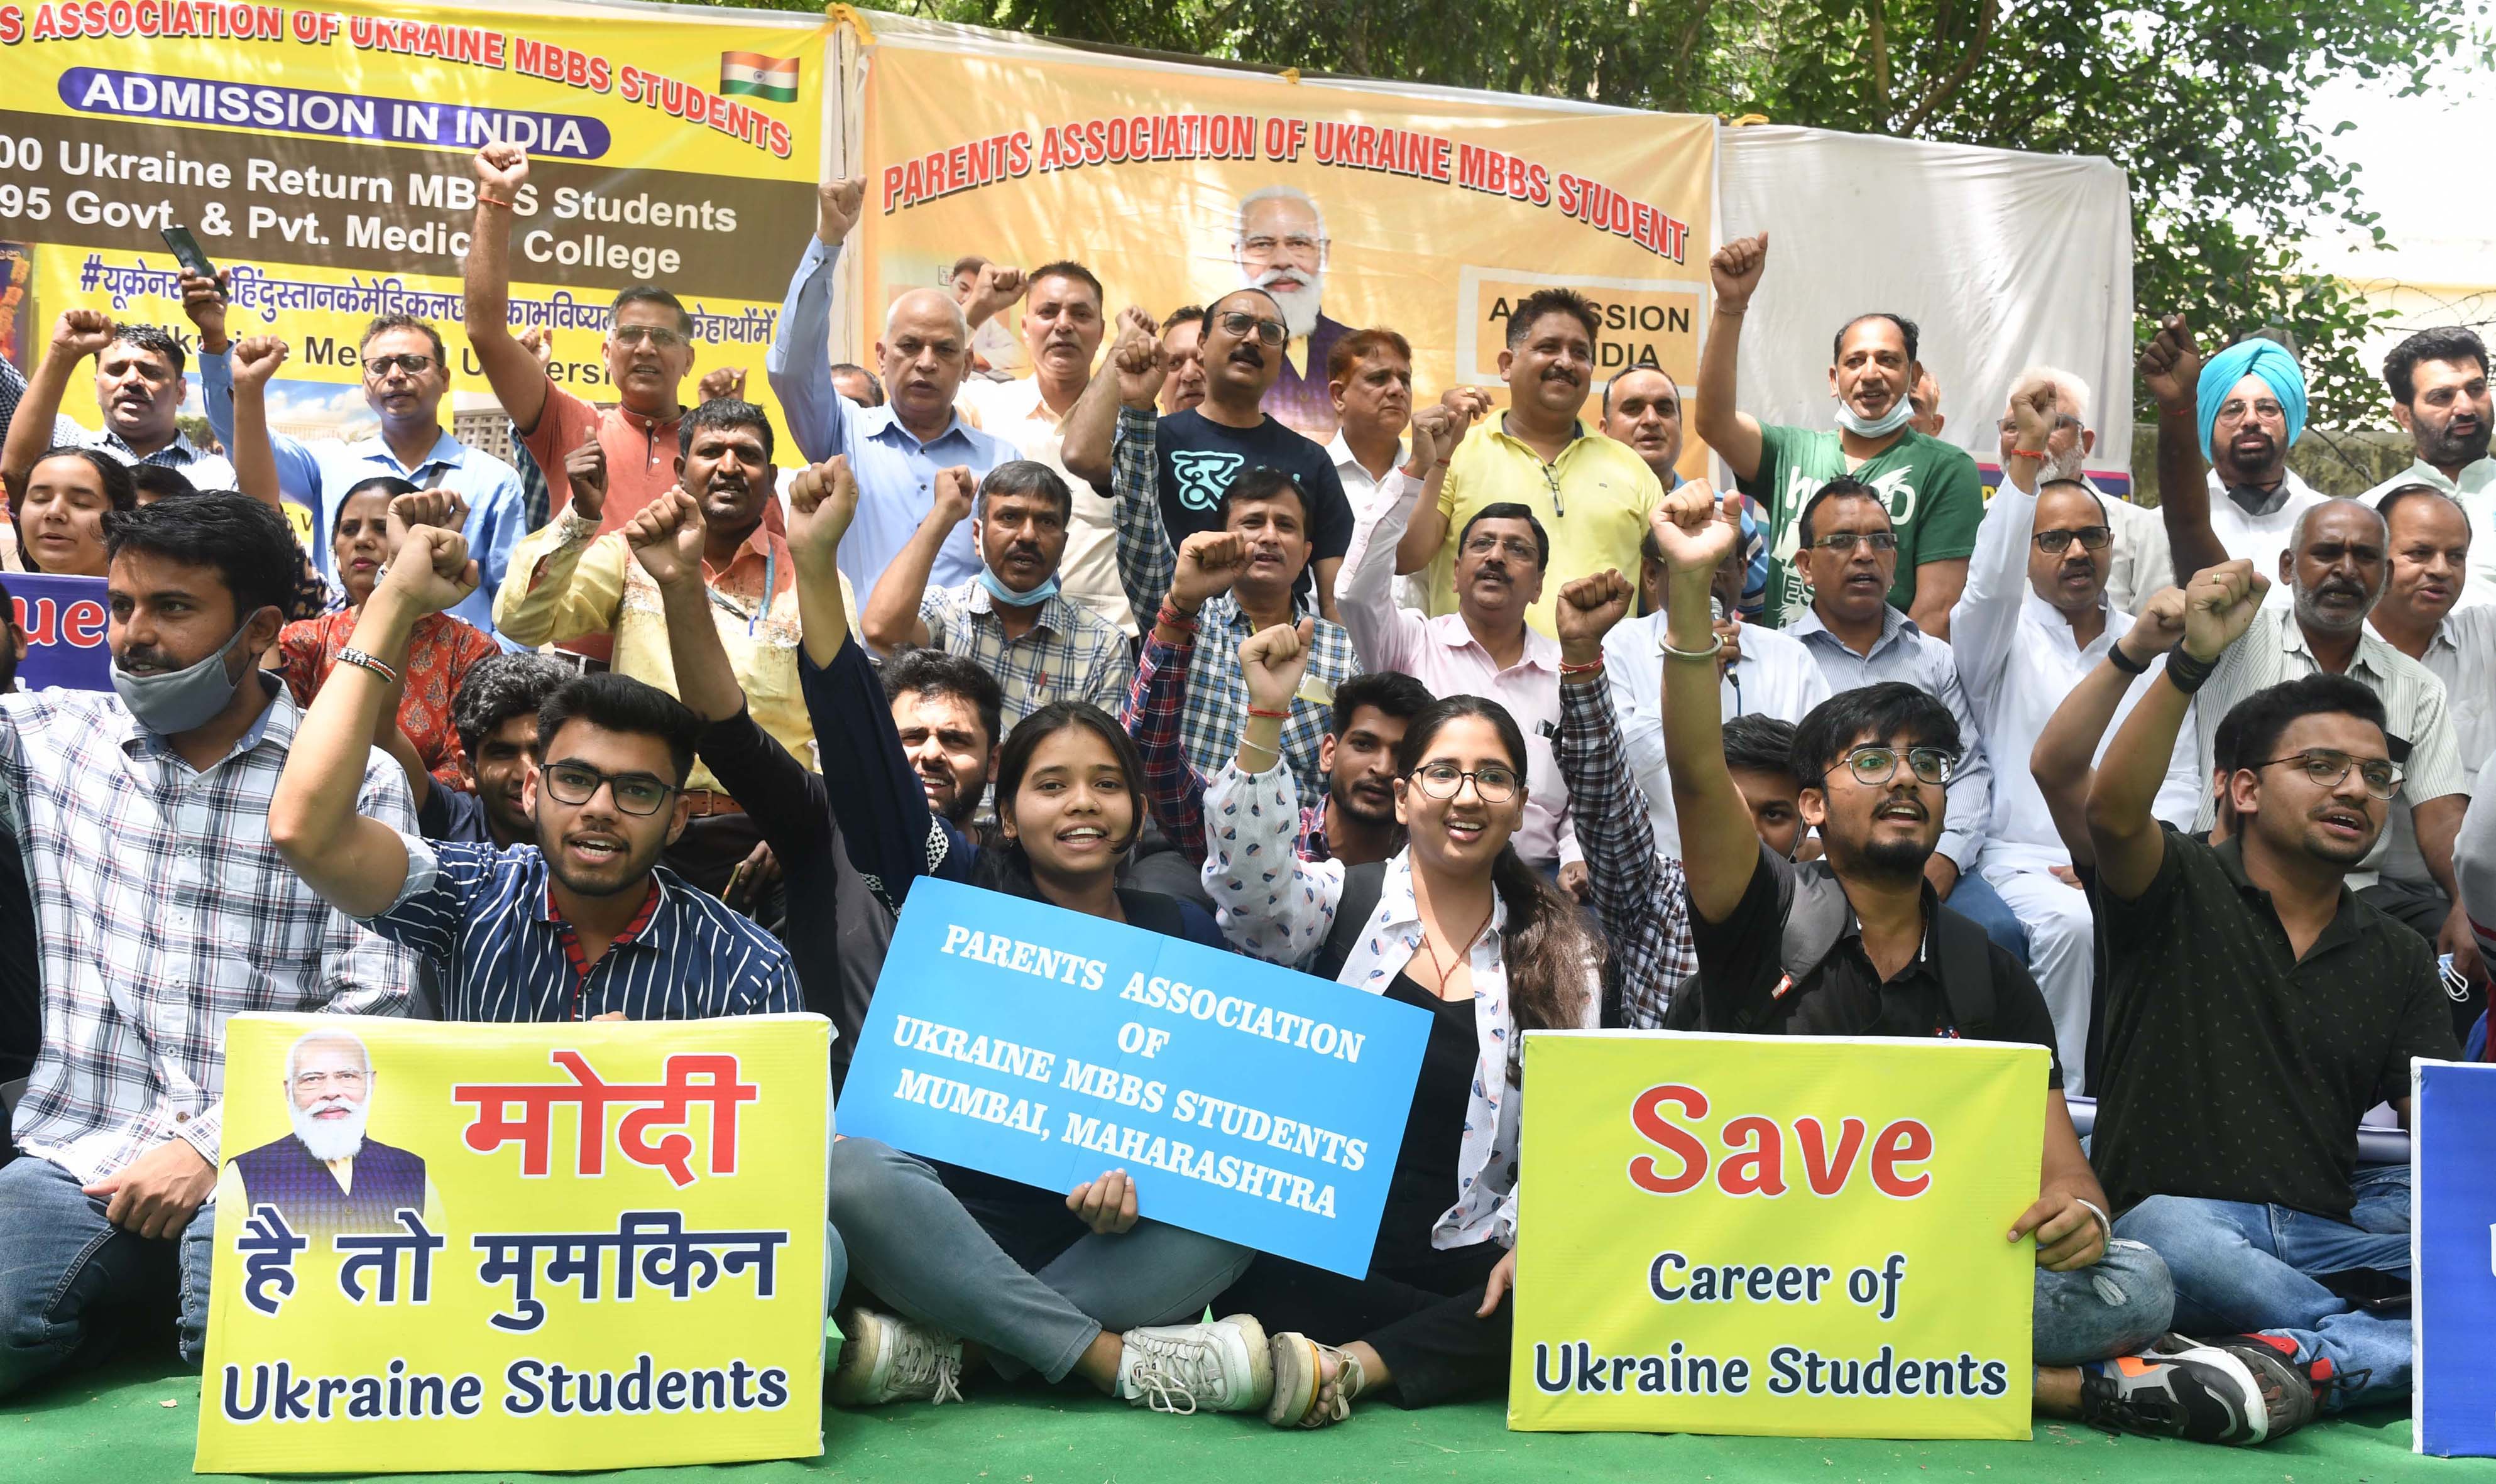 Accommodate students in Indian colleges demand parents of Ukraine returned students